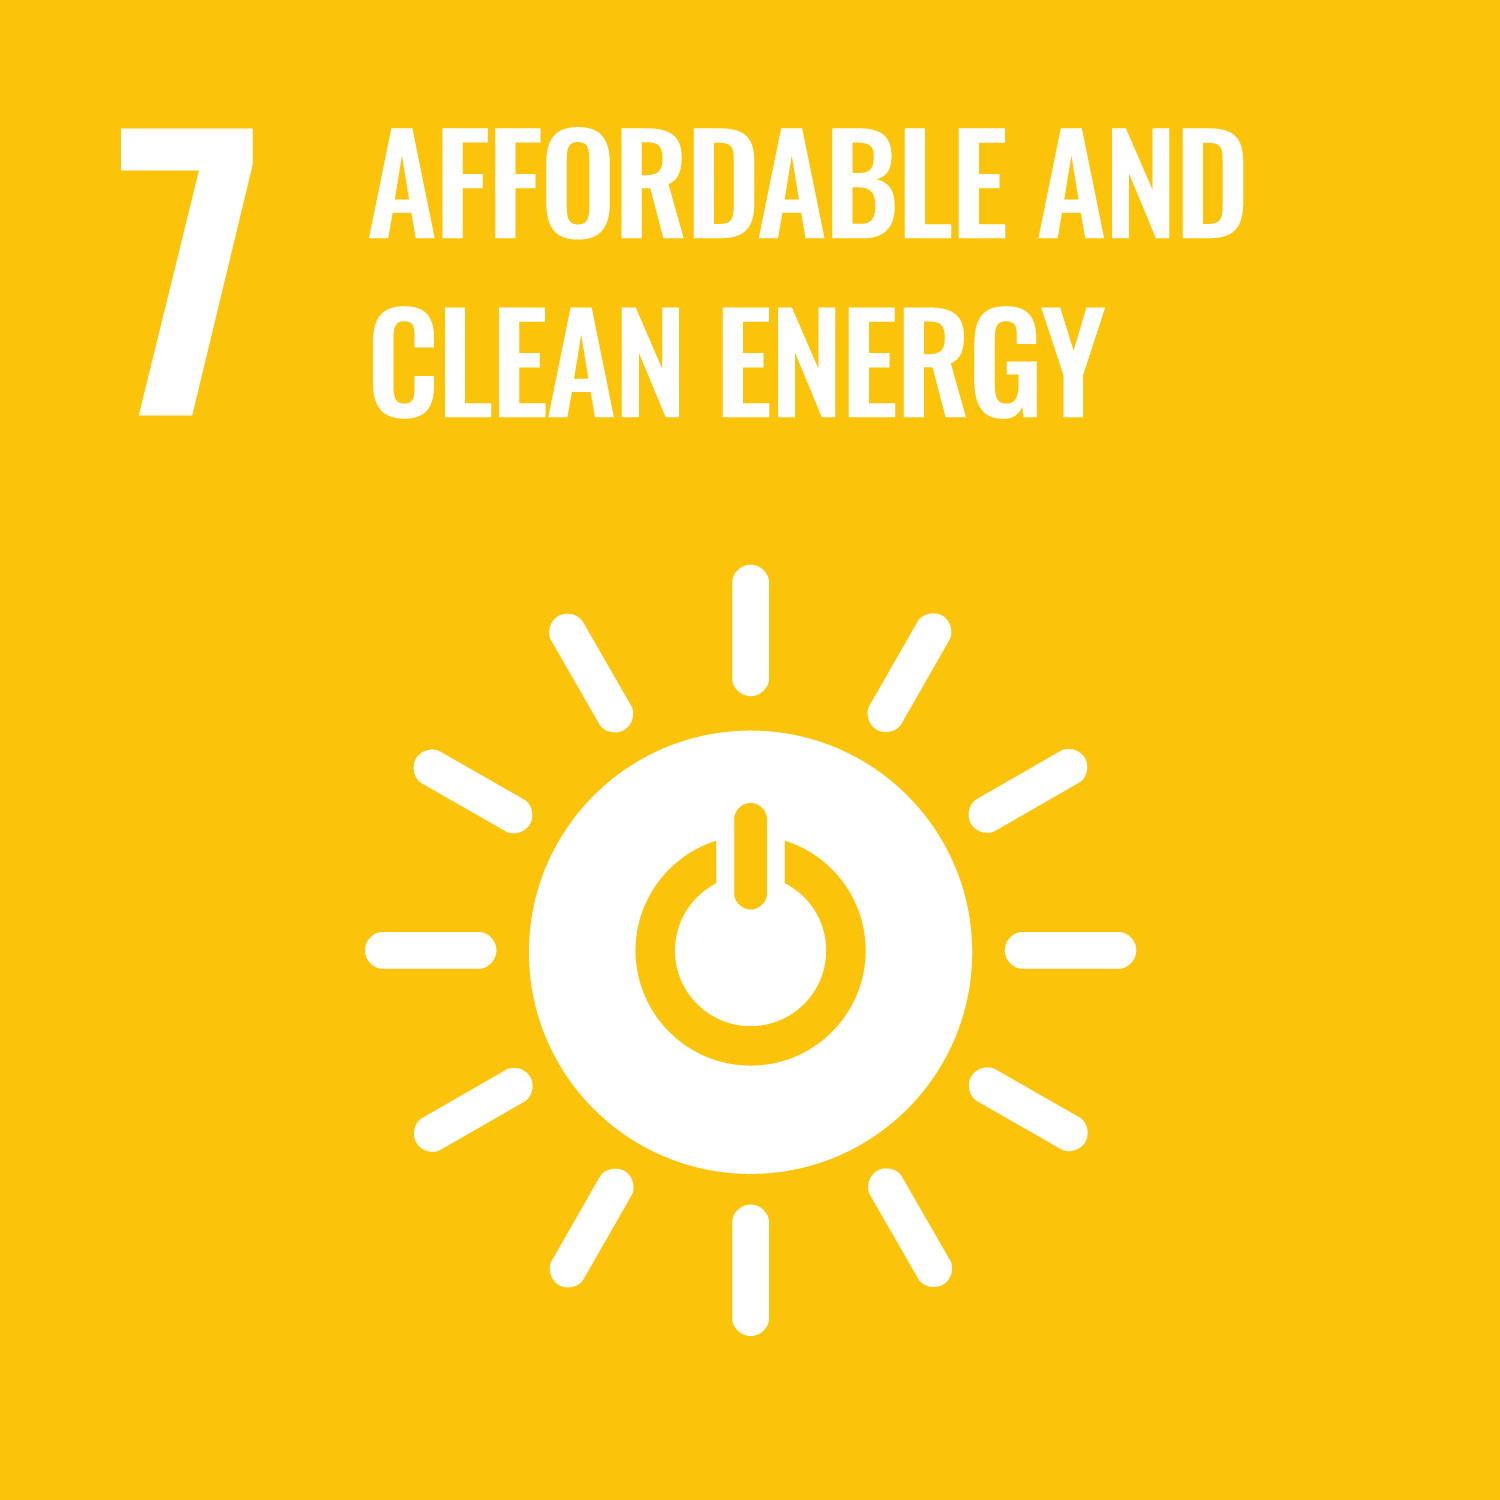 Logo of the Sustainable Development Goal 7: Affordable and Clean Energy